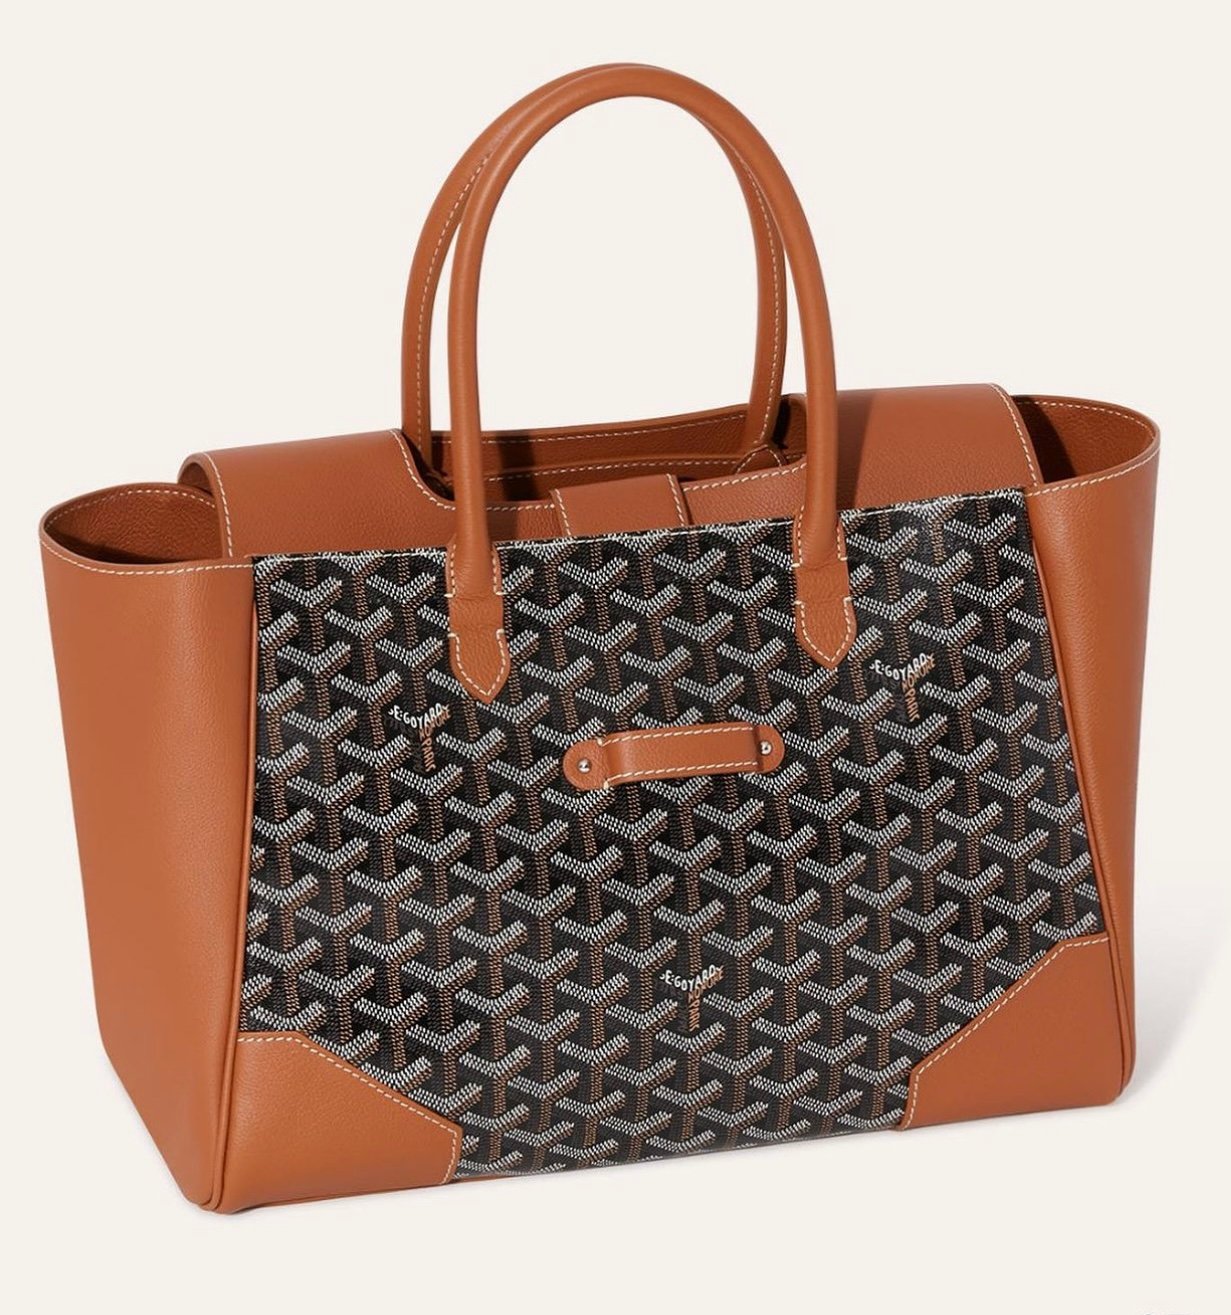 Introducing The New Goyard Saigon Tote The new Goyard Saigon Tote is the  latest design from fan-favorite tote bag maker… and we NEED this…